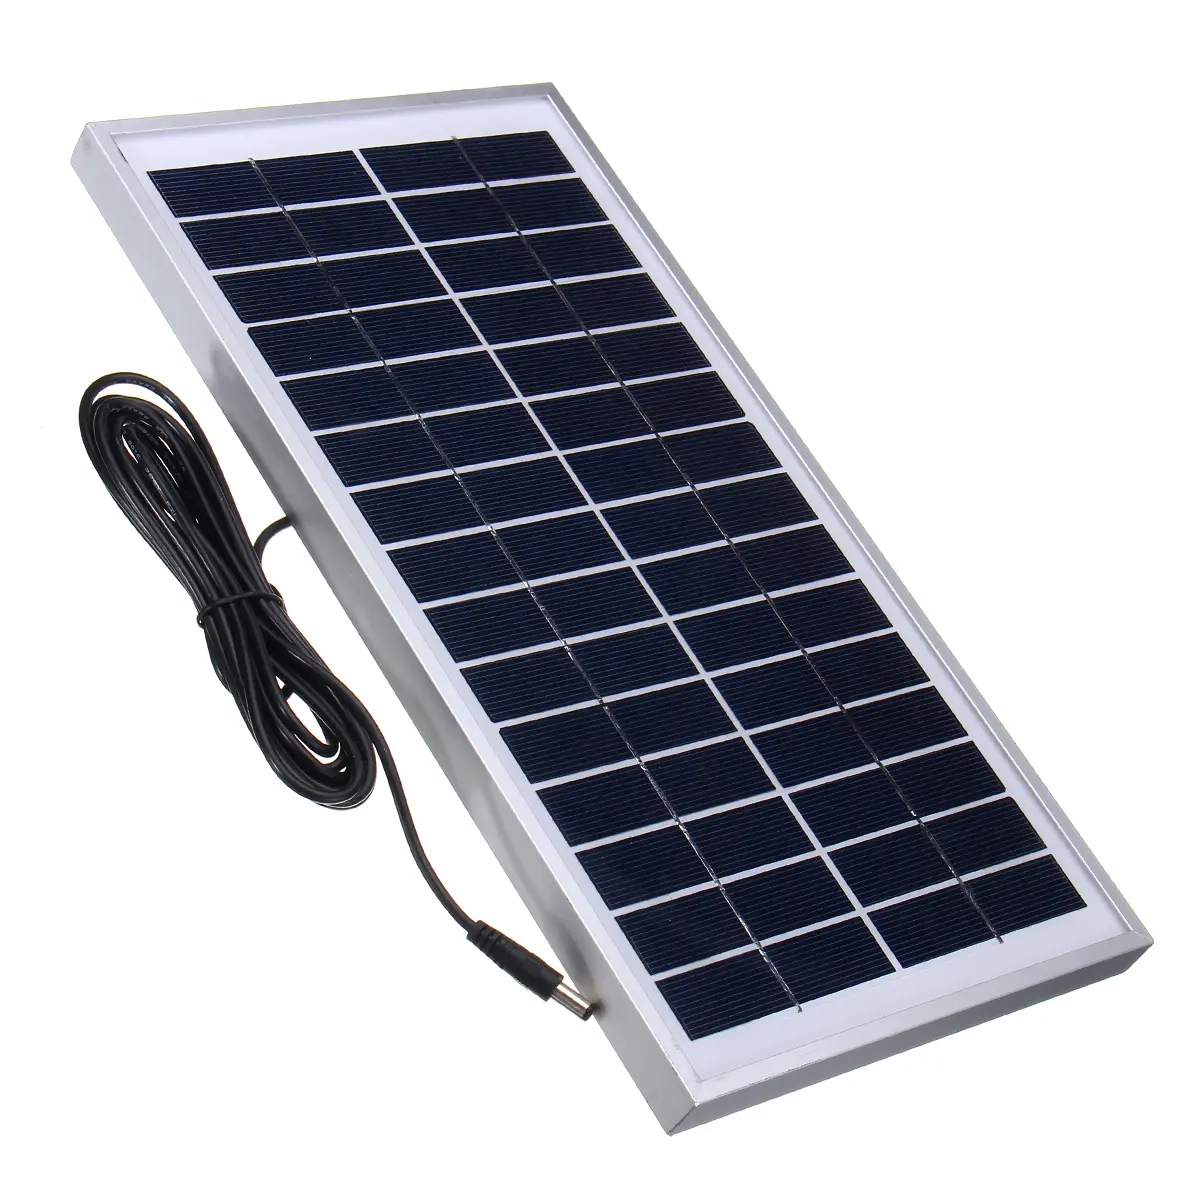 5V 75MA Mini Solar Panel System For DIY Battery Cell P Charger Favor Module Y4N4